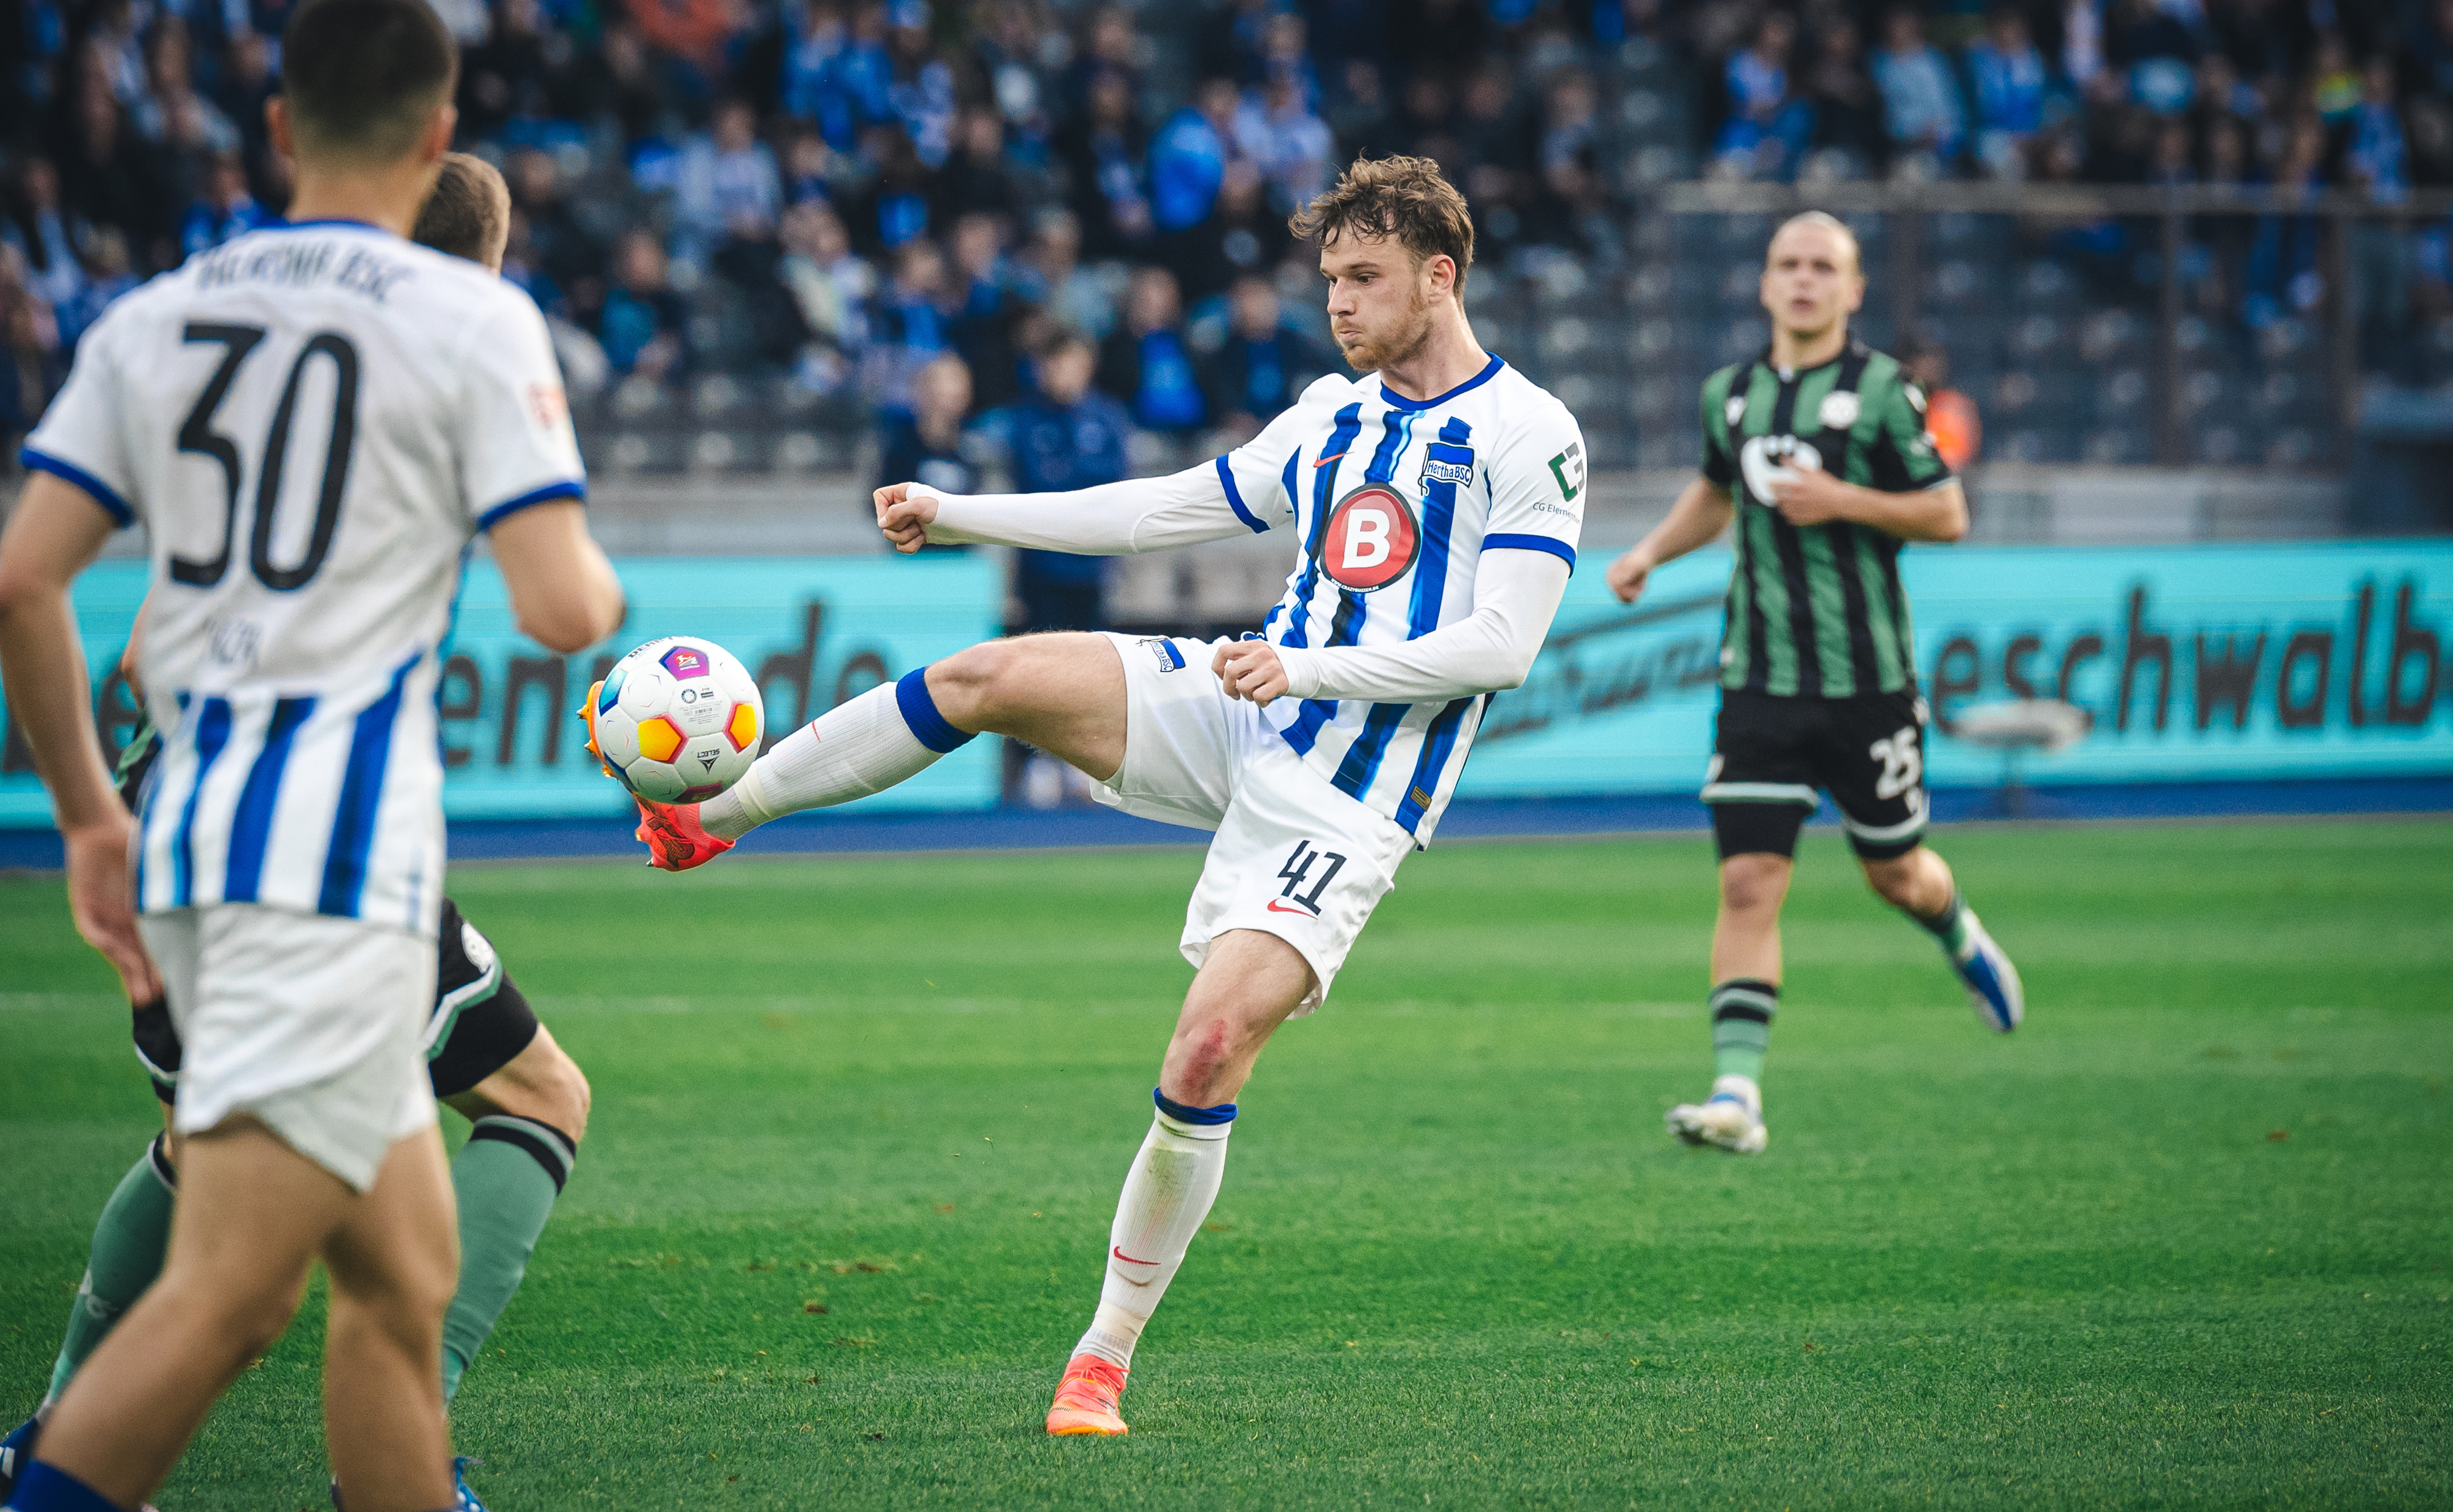 Pascal Klemens plays the ball against Hannover 96.